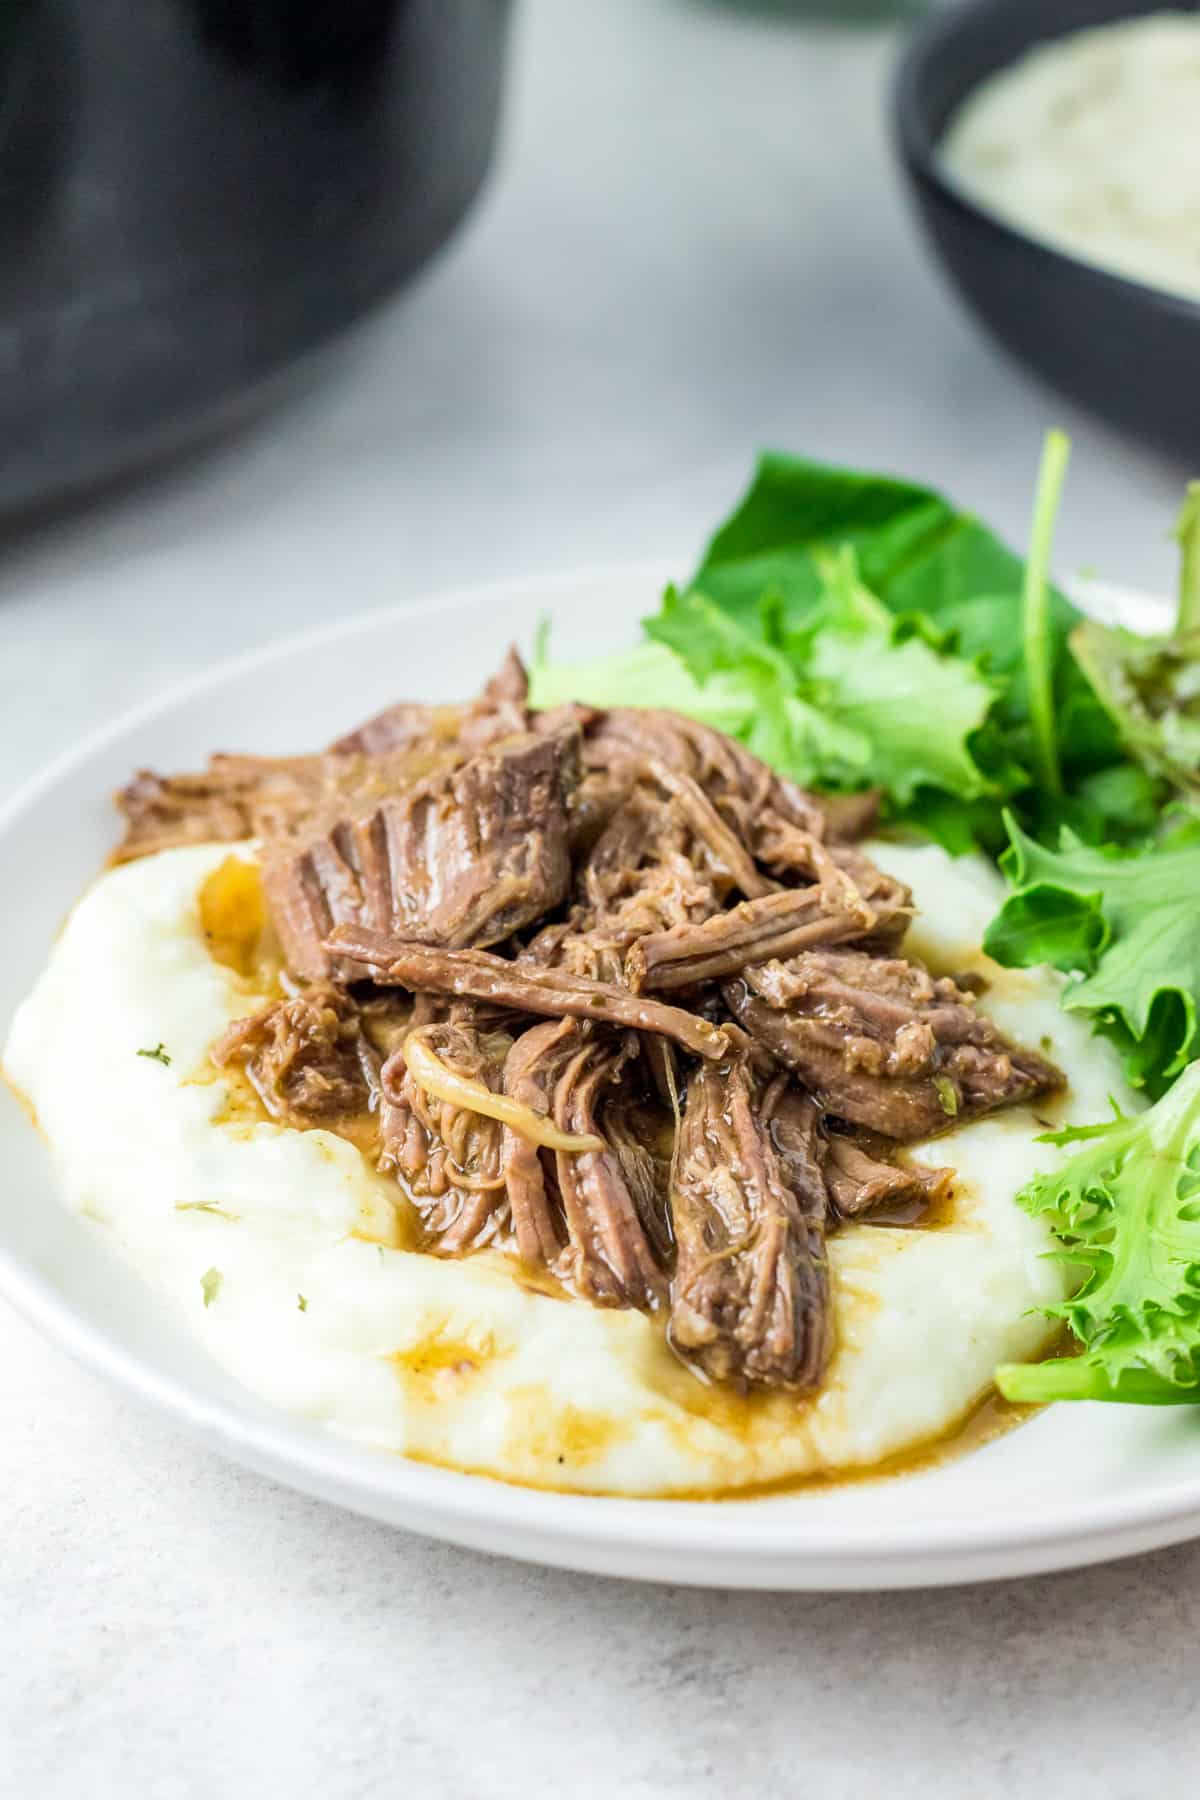 Slow Cooker Shredded Beef over mashed potatoes with a side salad on white plate.